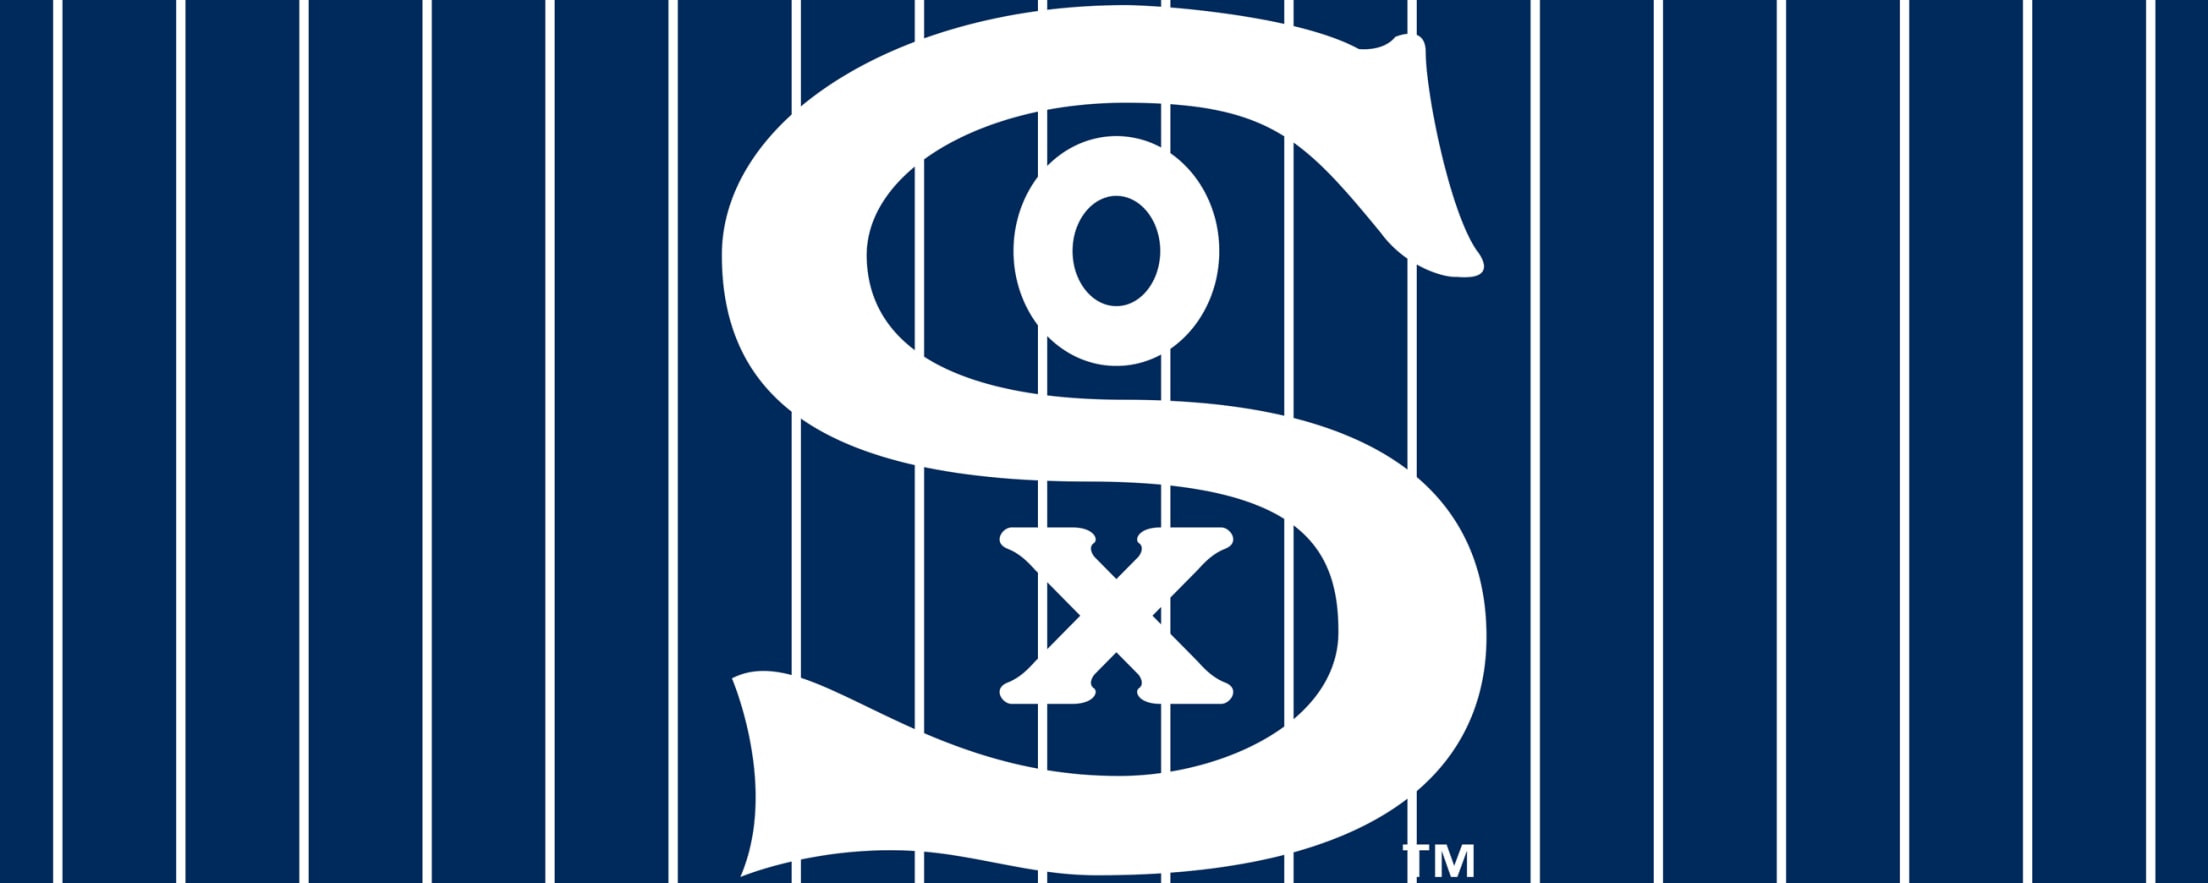 Logos And Uniforms White Sox History Chicago White Sox